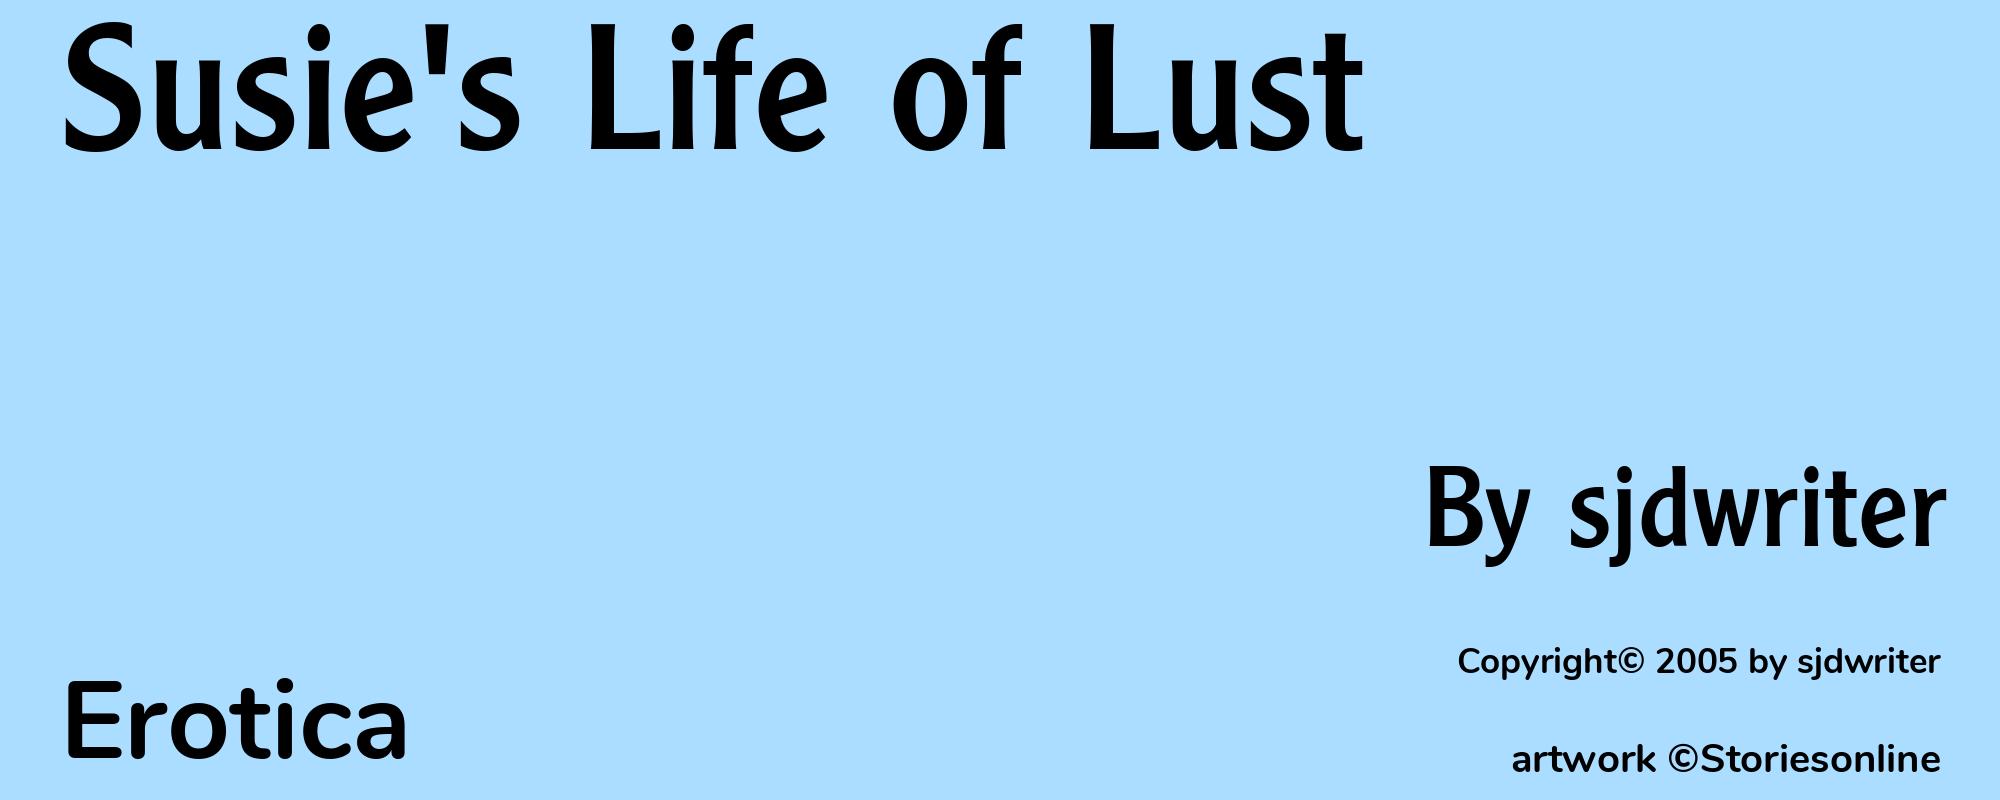 Susie's Life of Lust - Cover